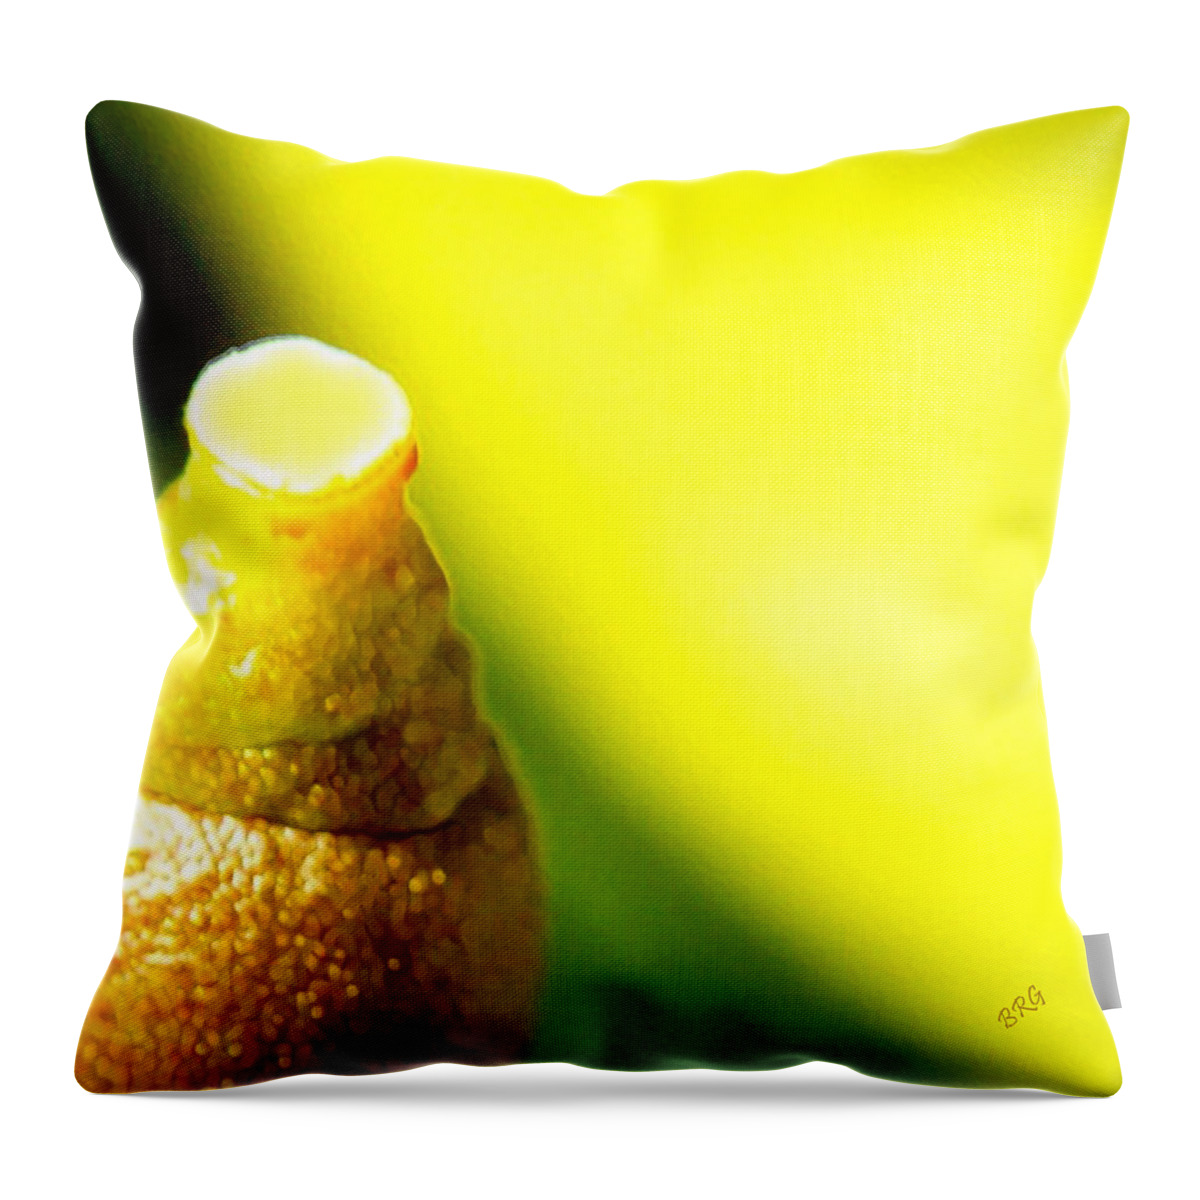 Fruit Throw Pillow featuring the photograph Baby Lemon On Tree by Ben and Raisa Gertsberg